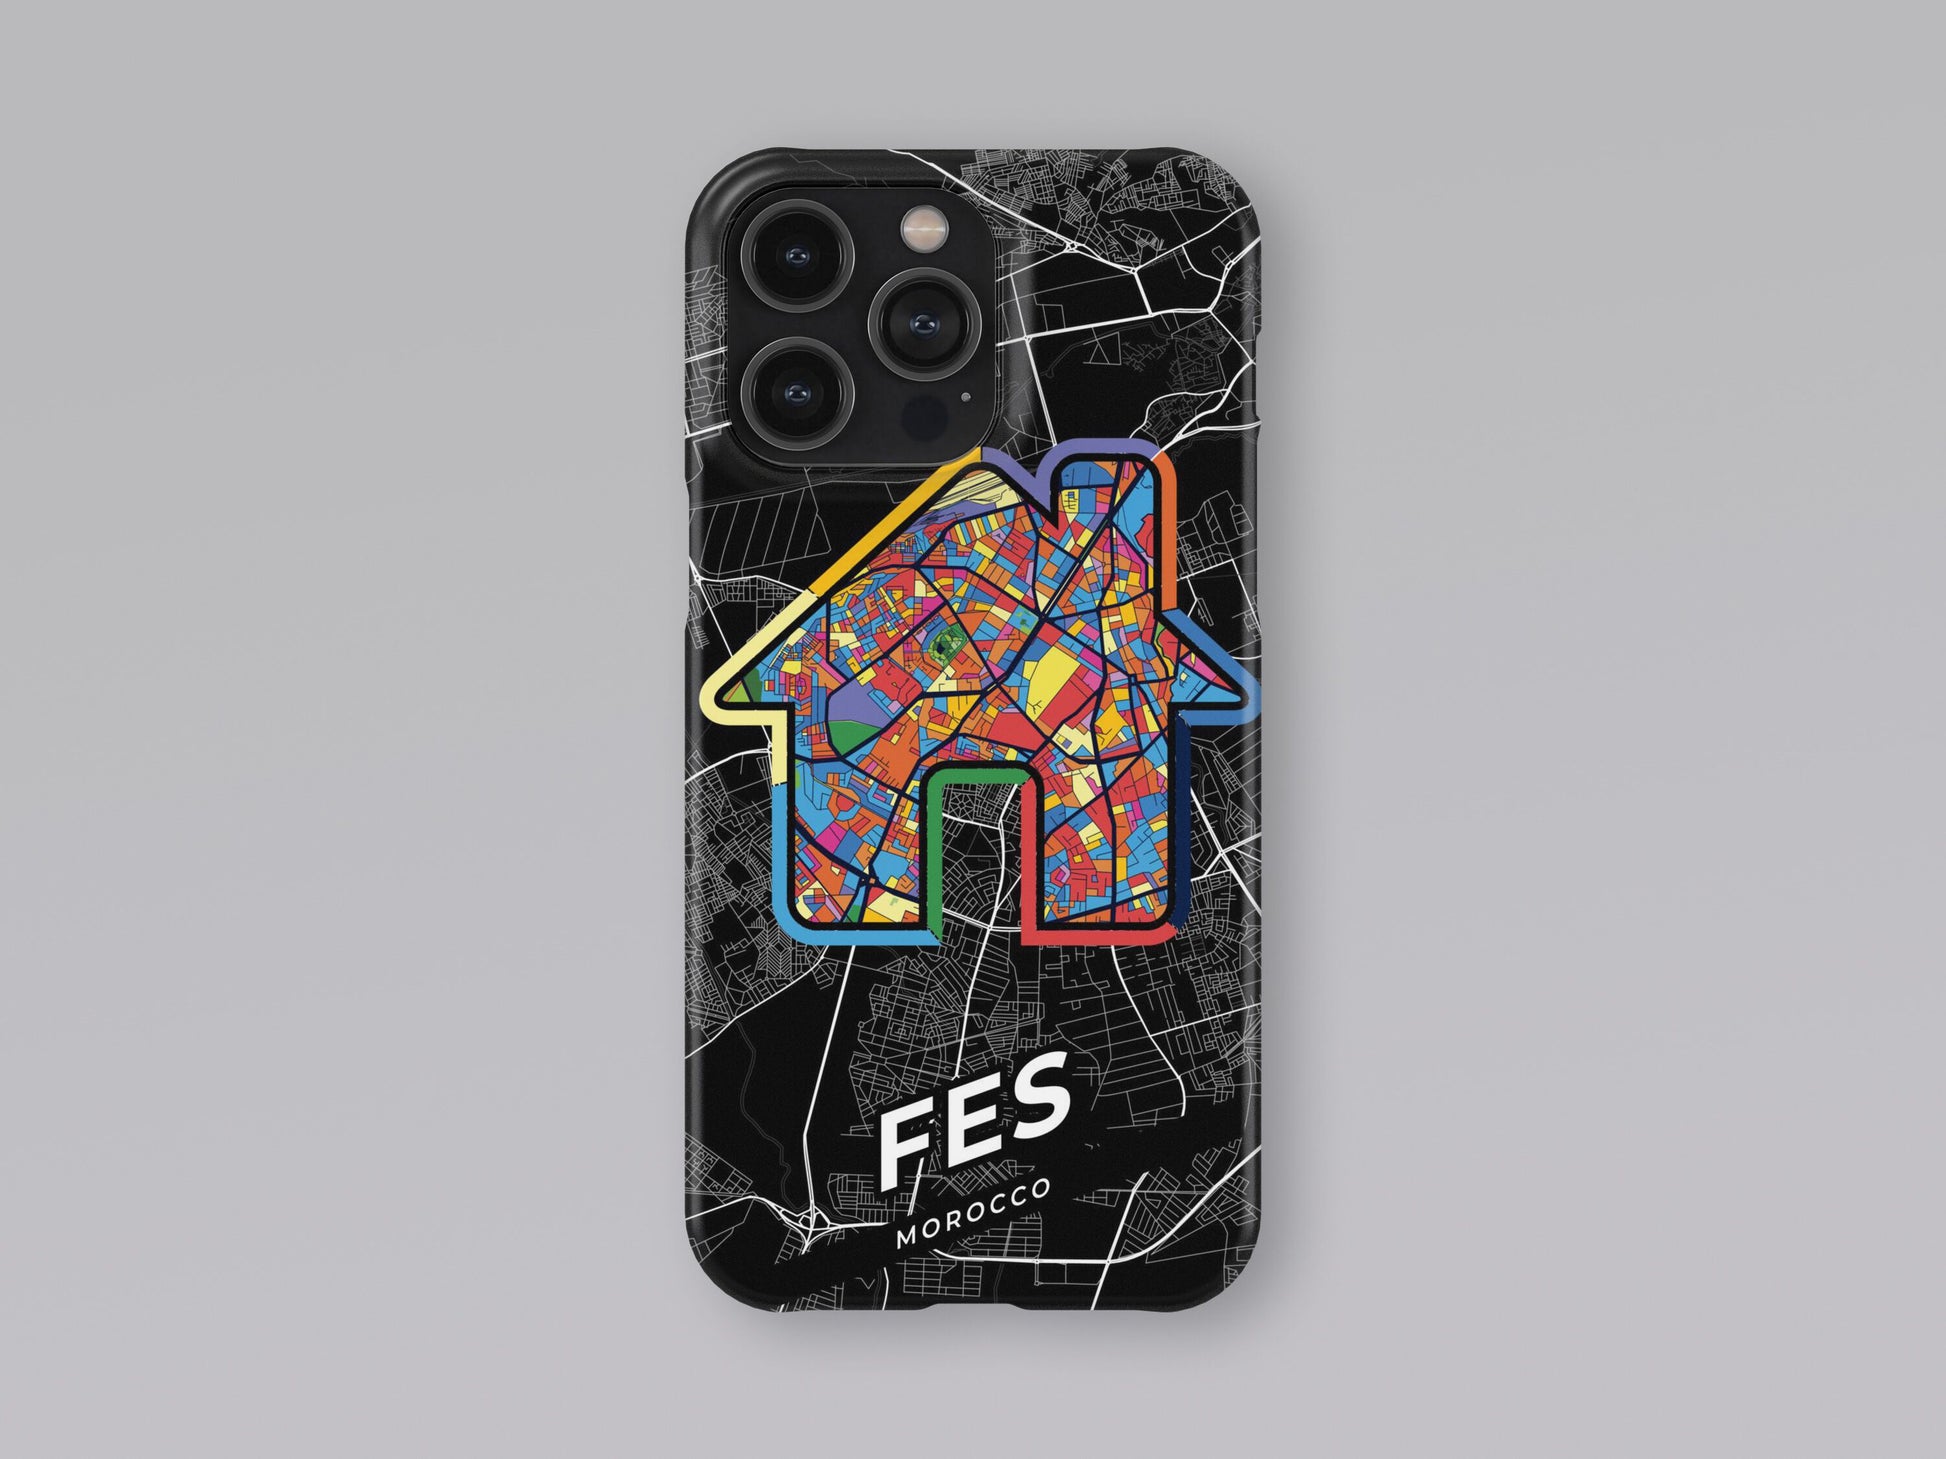 Fes Morocco slim phone case with colorful icon. Birthday, wedding or housewarming gift. Couple match cases. 3